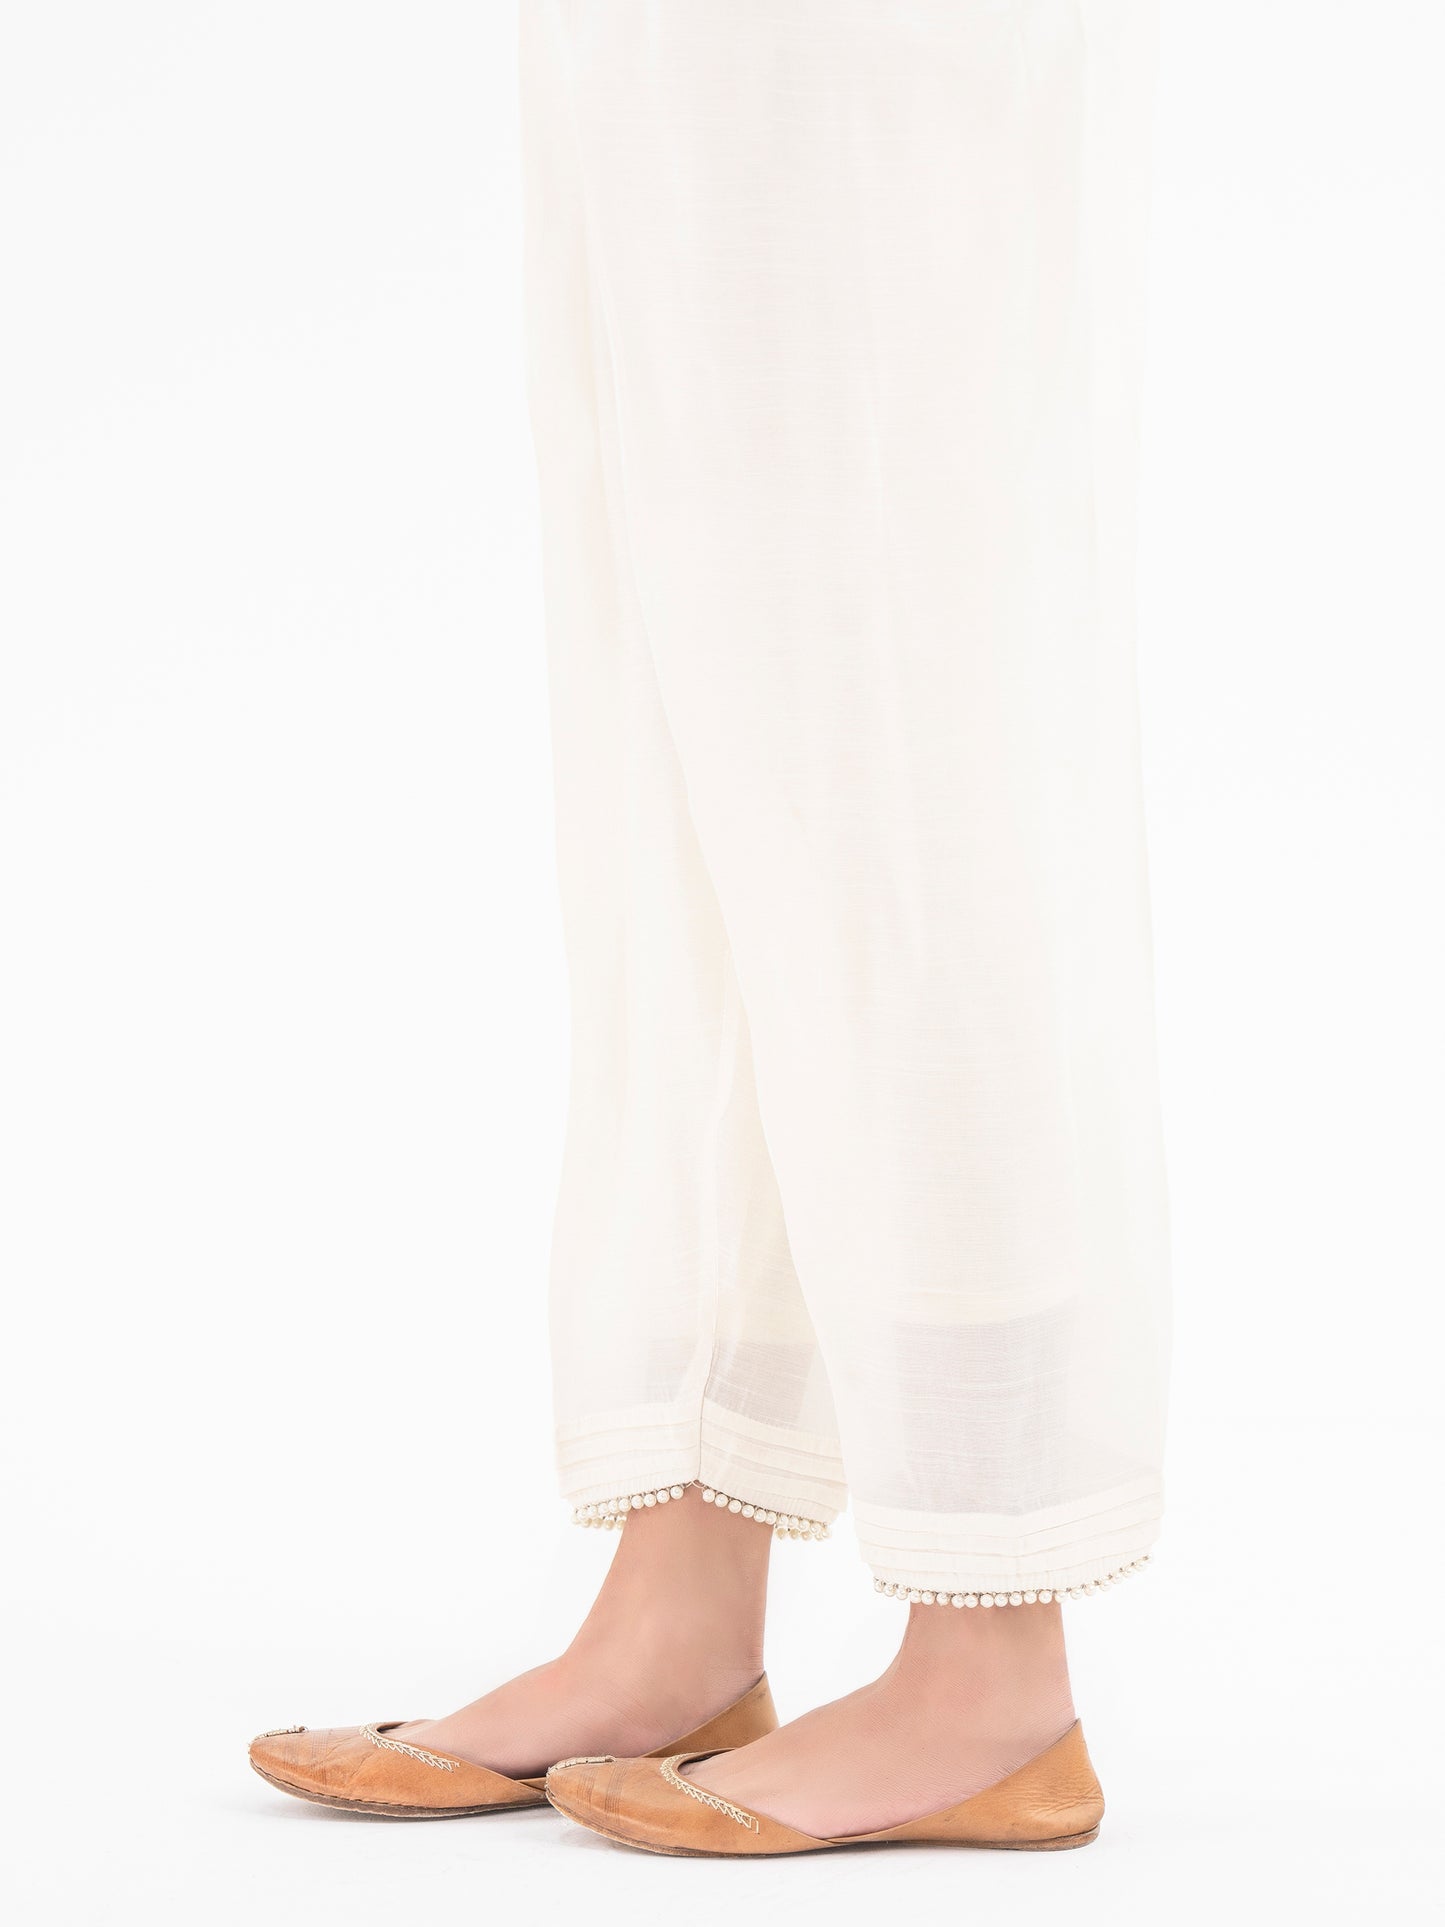 Dyed Raw Silk Trouser (Pret)